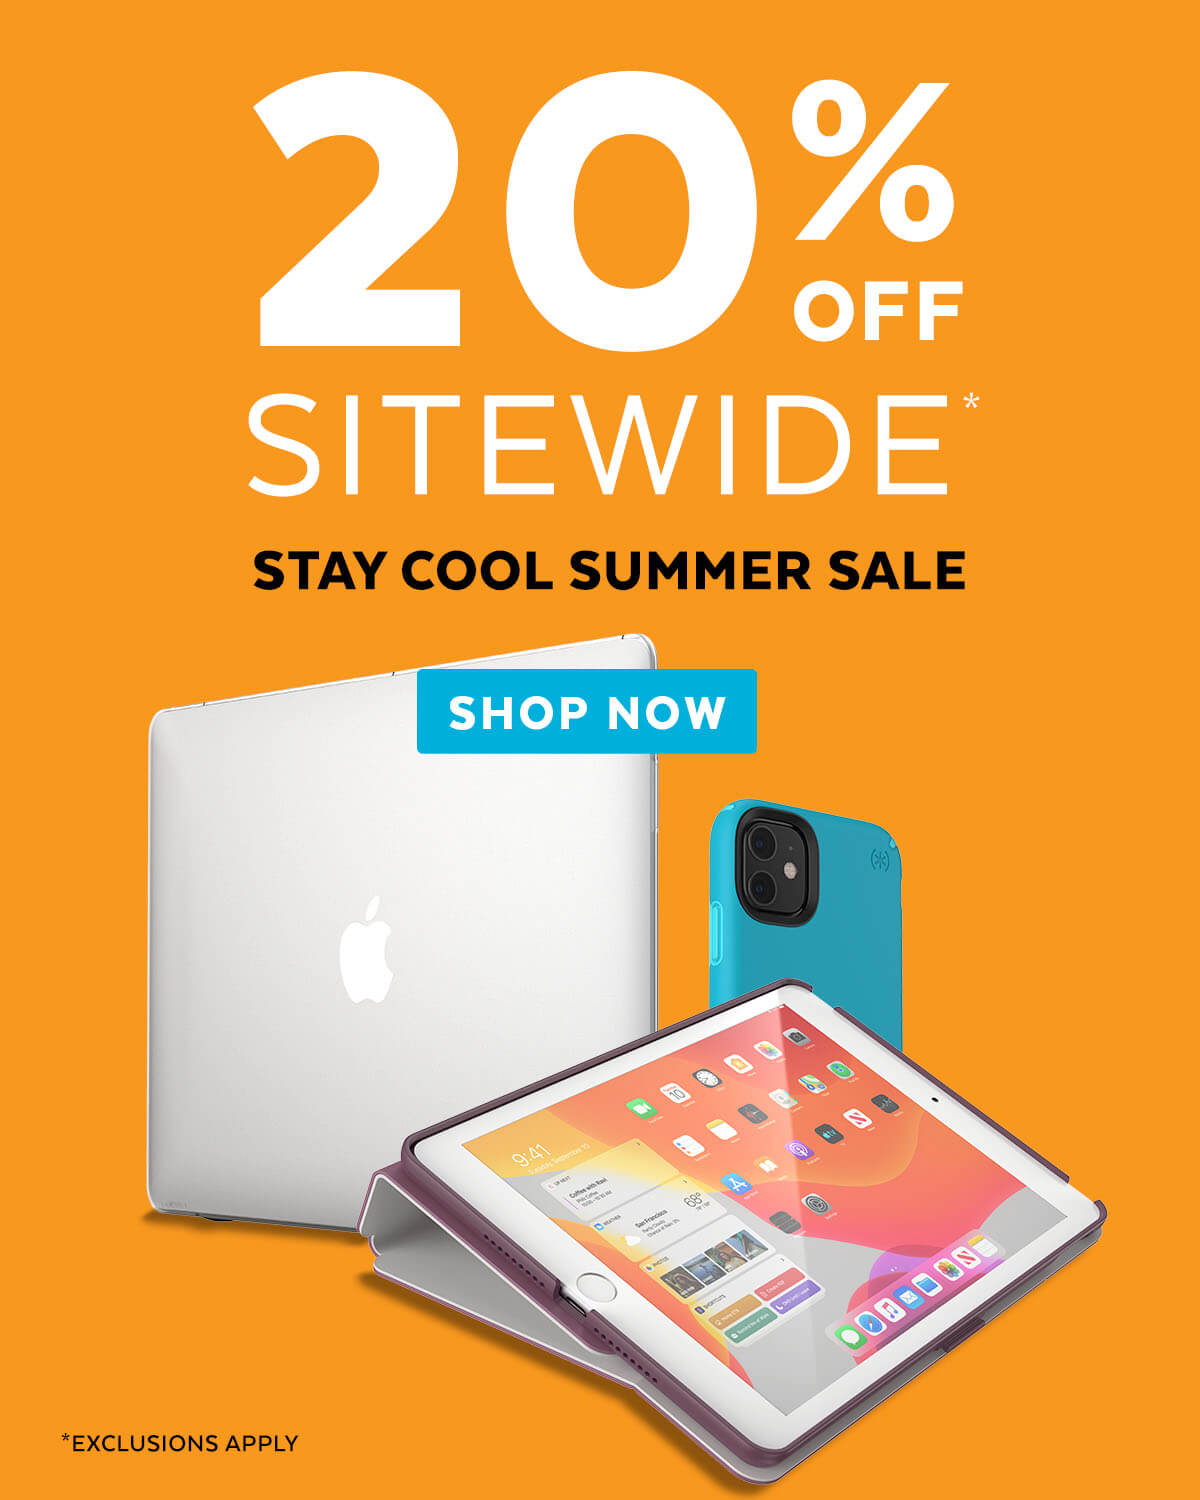 20% off Sitewide. Stay Cool Summer Sale. Shop now! *Exclusions Apply